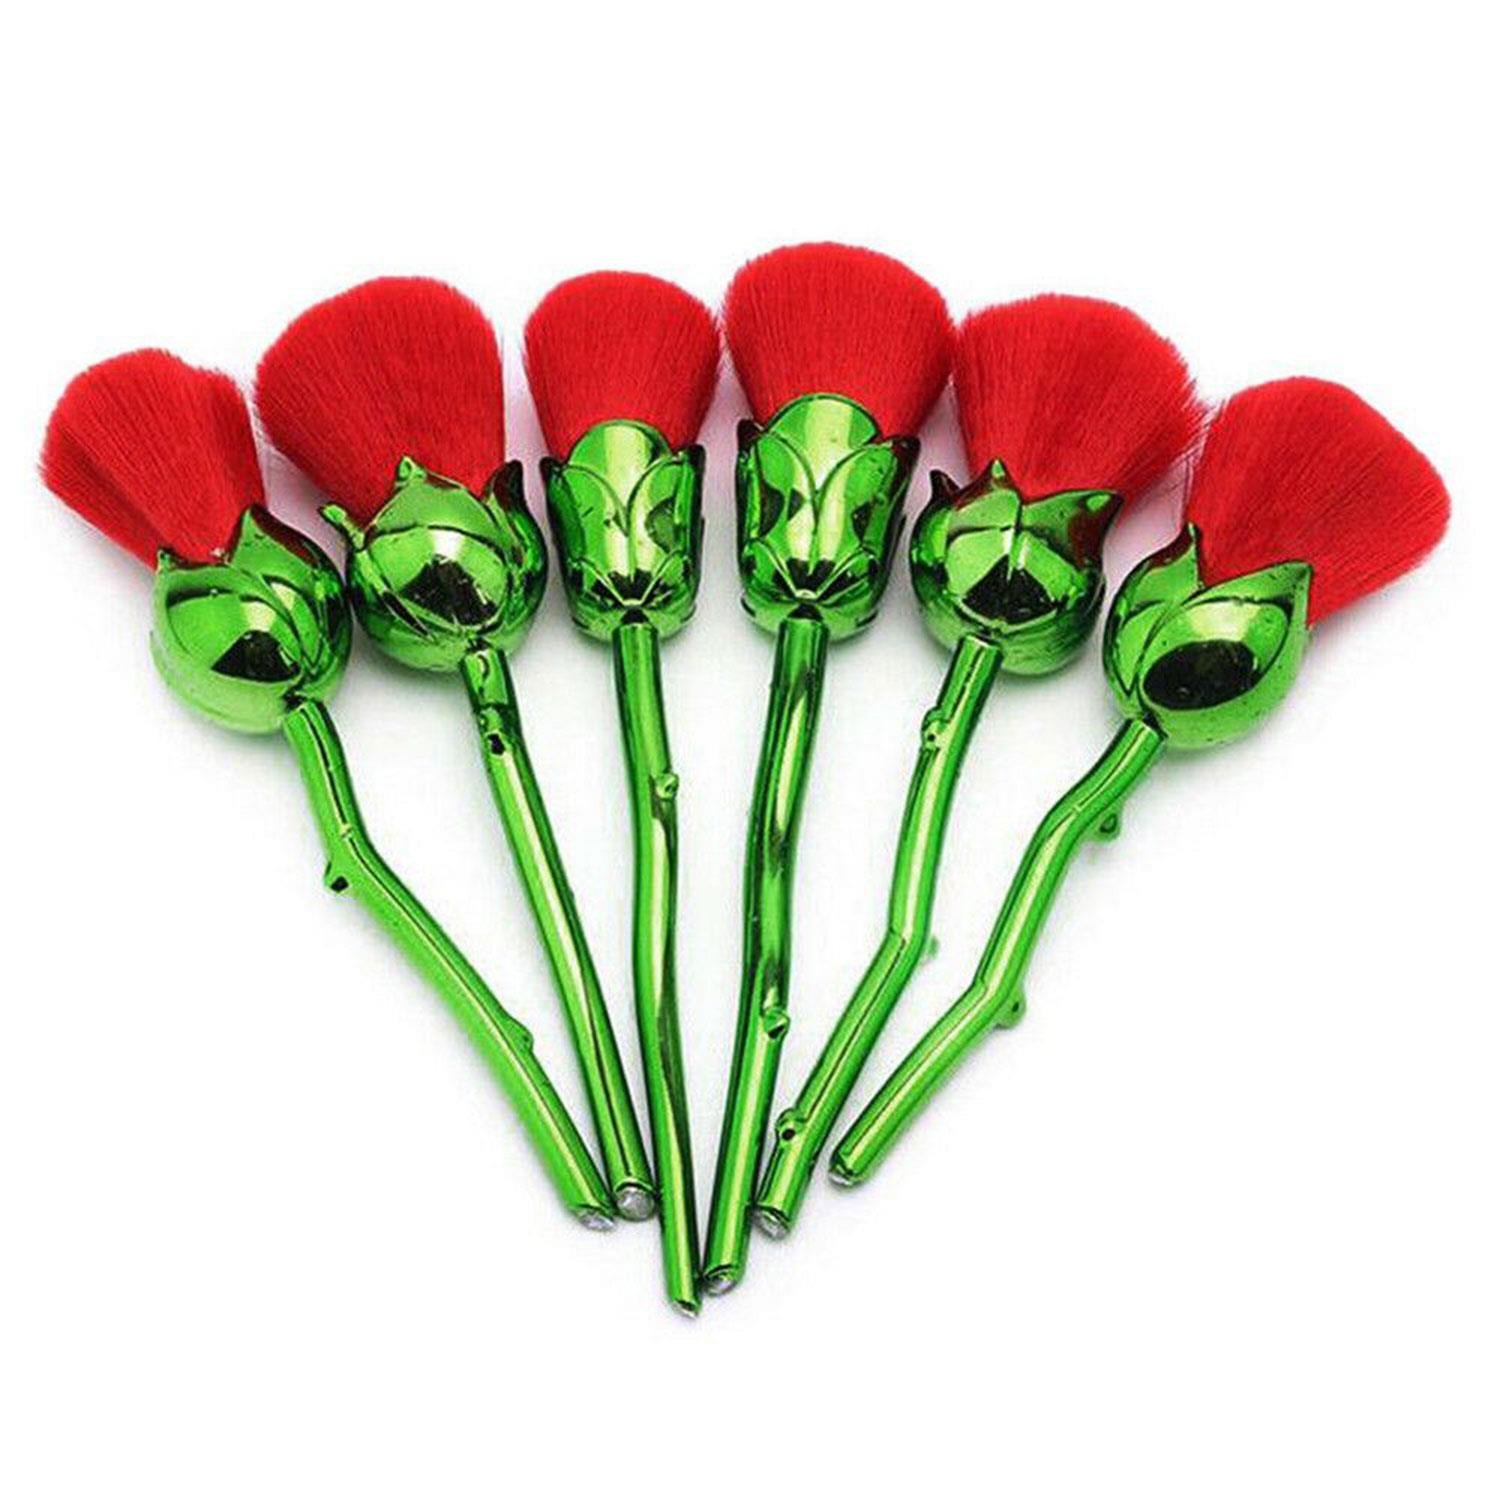 Aquarius 6pc Beauty and the Beast-Inspired Rose Makeup Brushes with Glossy Handles Green